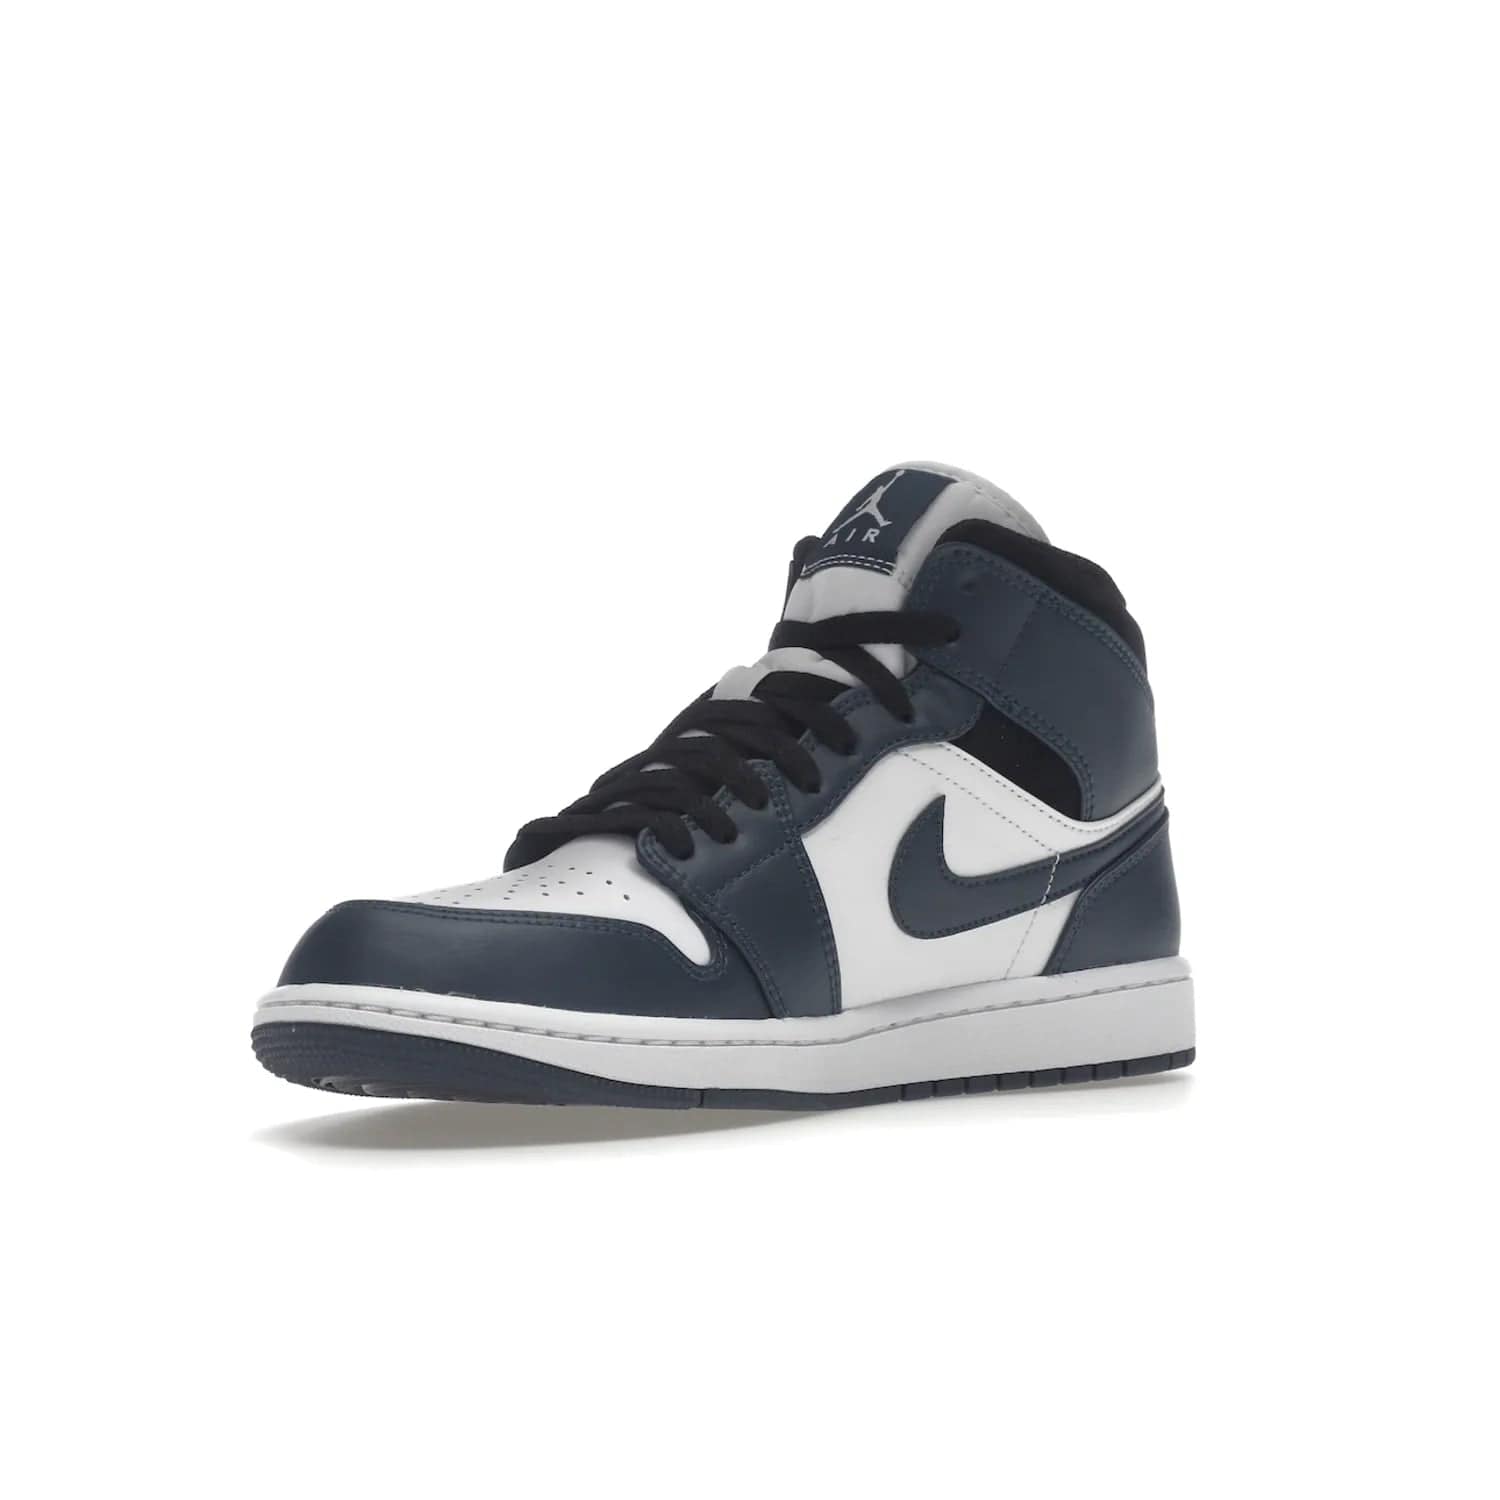 Jordan 1 Mid Armory Navy - Image 15 - Only at www.BallersClubKickz.com - The Jordan 1 Mid Armory Navy: classic basketball sneaker with soft white leather upper, deep navy blue overlays, and black leather ankle detailing. Iconic style with Jordan Wings logo and Jumpman label.